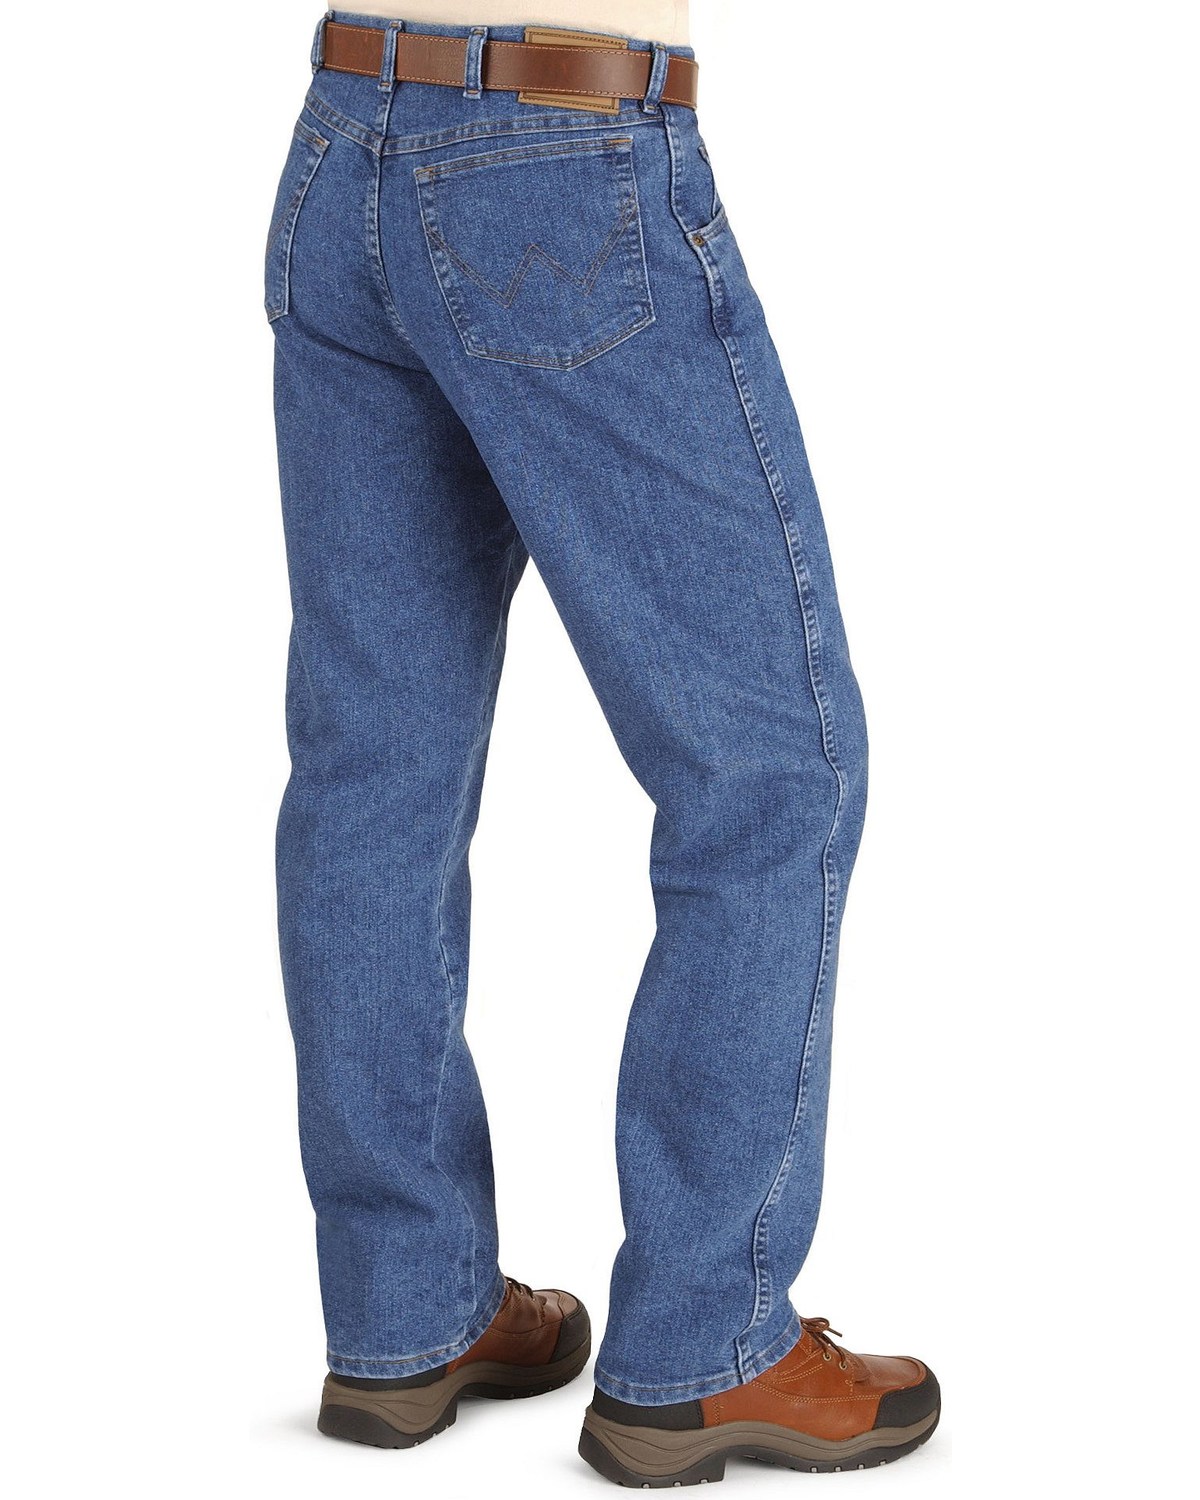 Wrangler jeans - Rugged Wear relaxed fit stretch | Boot Barn